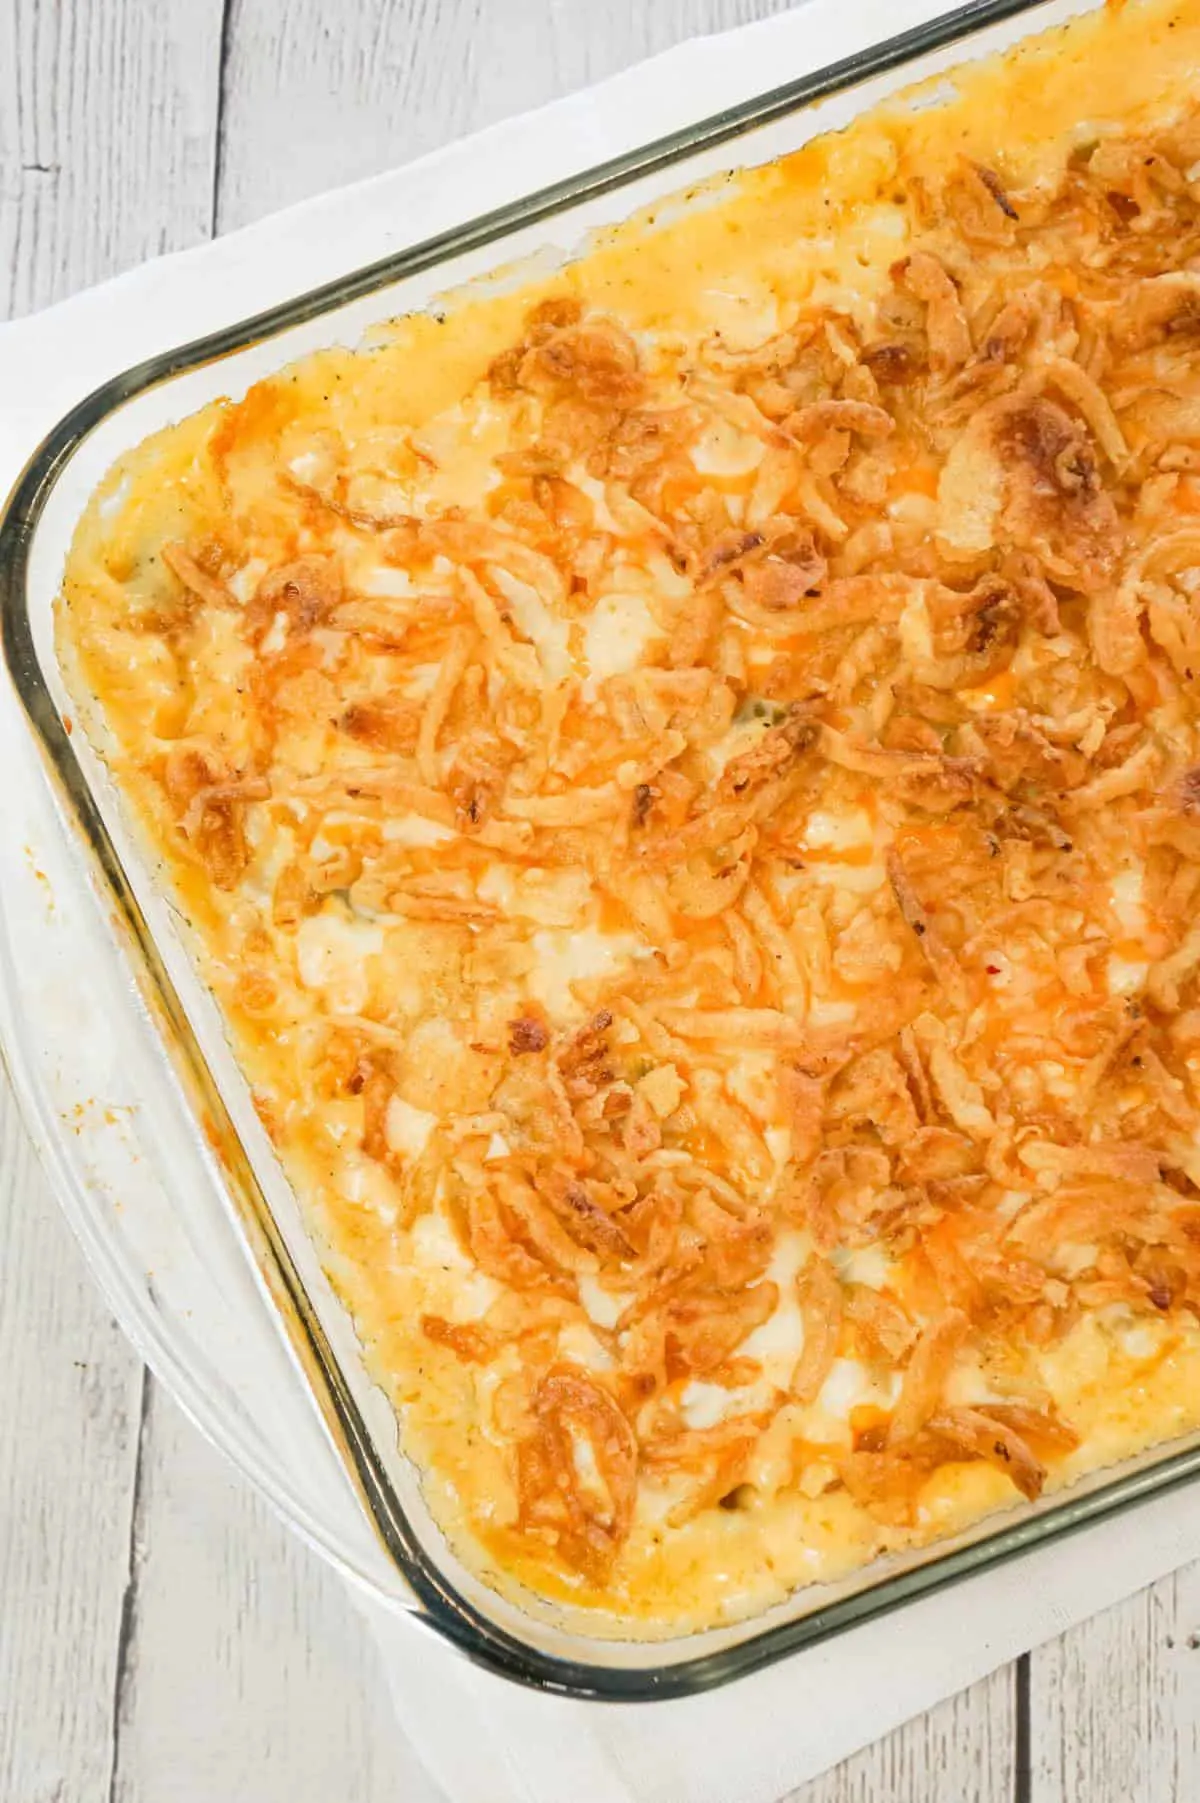 Mac and Cheese Green Bean Casserole is a tasty side dish recipe loaded with macaroni and green beans in a creamy cheese sauce, all topped with French's crispy fried onions!